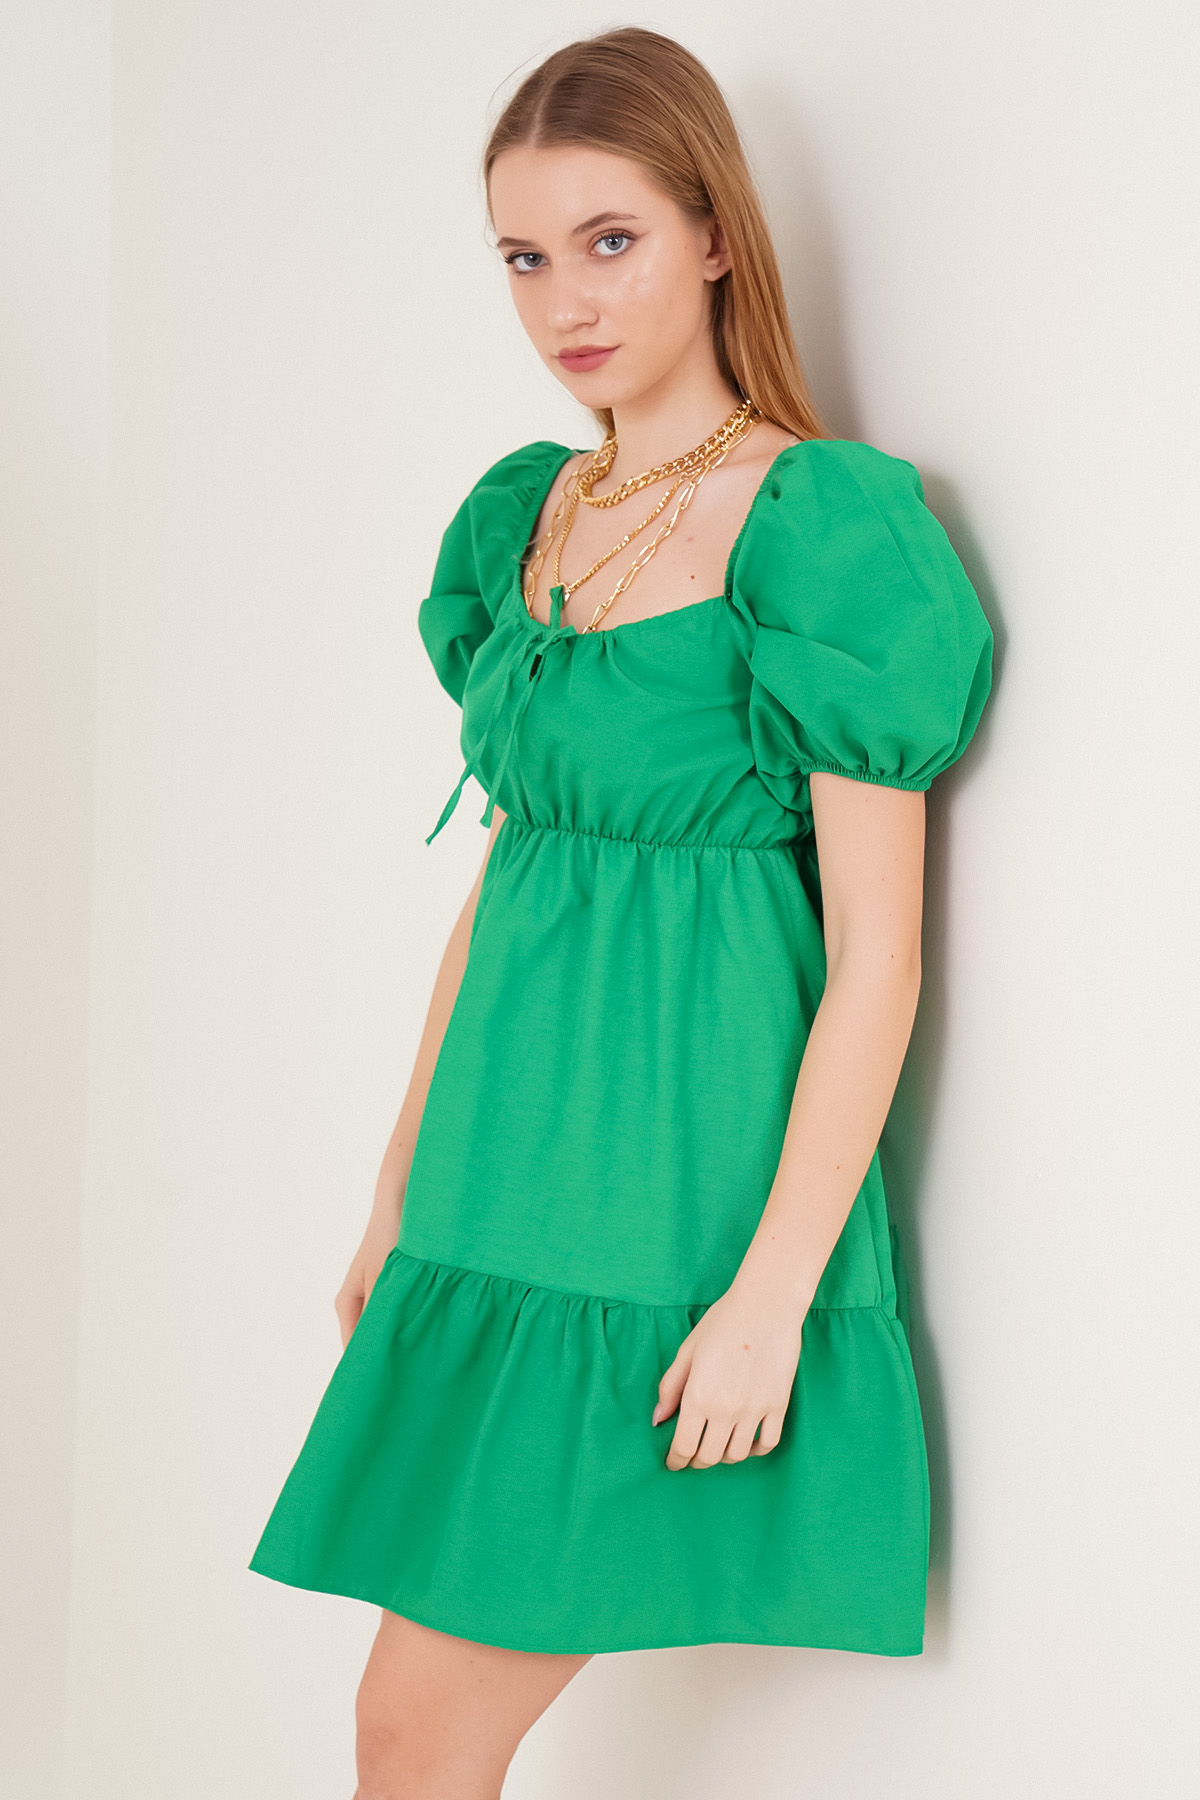 A model wears 46457 - Dress - Green, wholesale Dress of Bigdart to display at Lonca